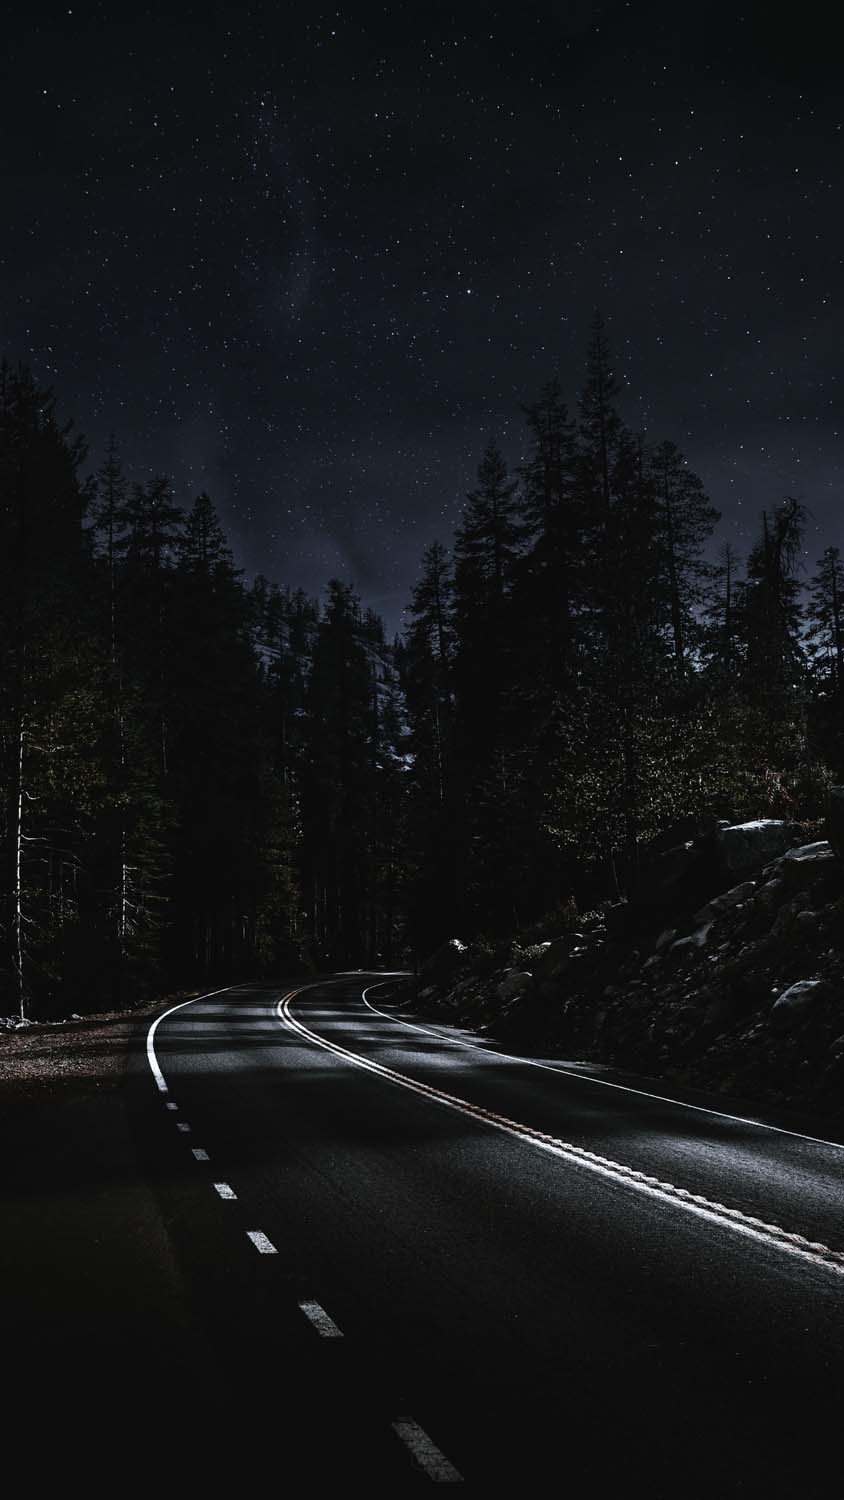 Night Forest Road iPhone Wallpaper HD